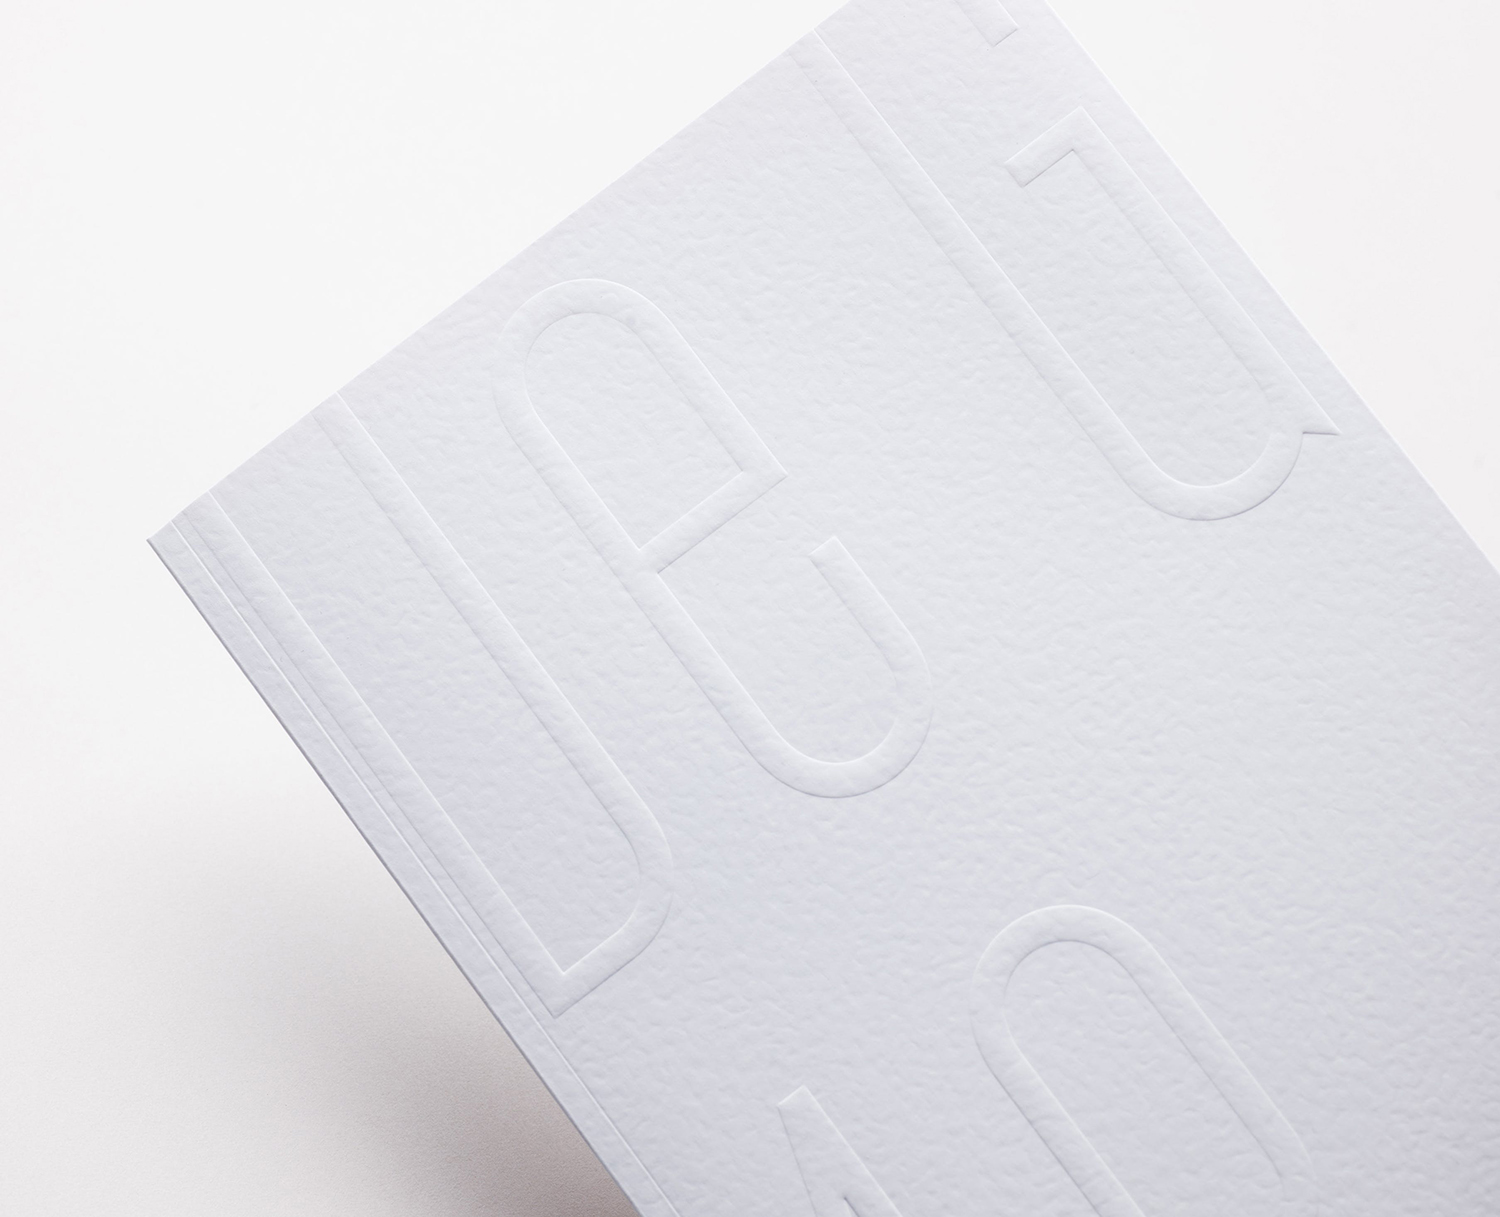 Blind embossed print by Base Design for high-end jewellery brand, expert watchmaker and retailer Maison De Greef 1848